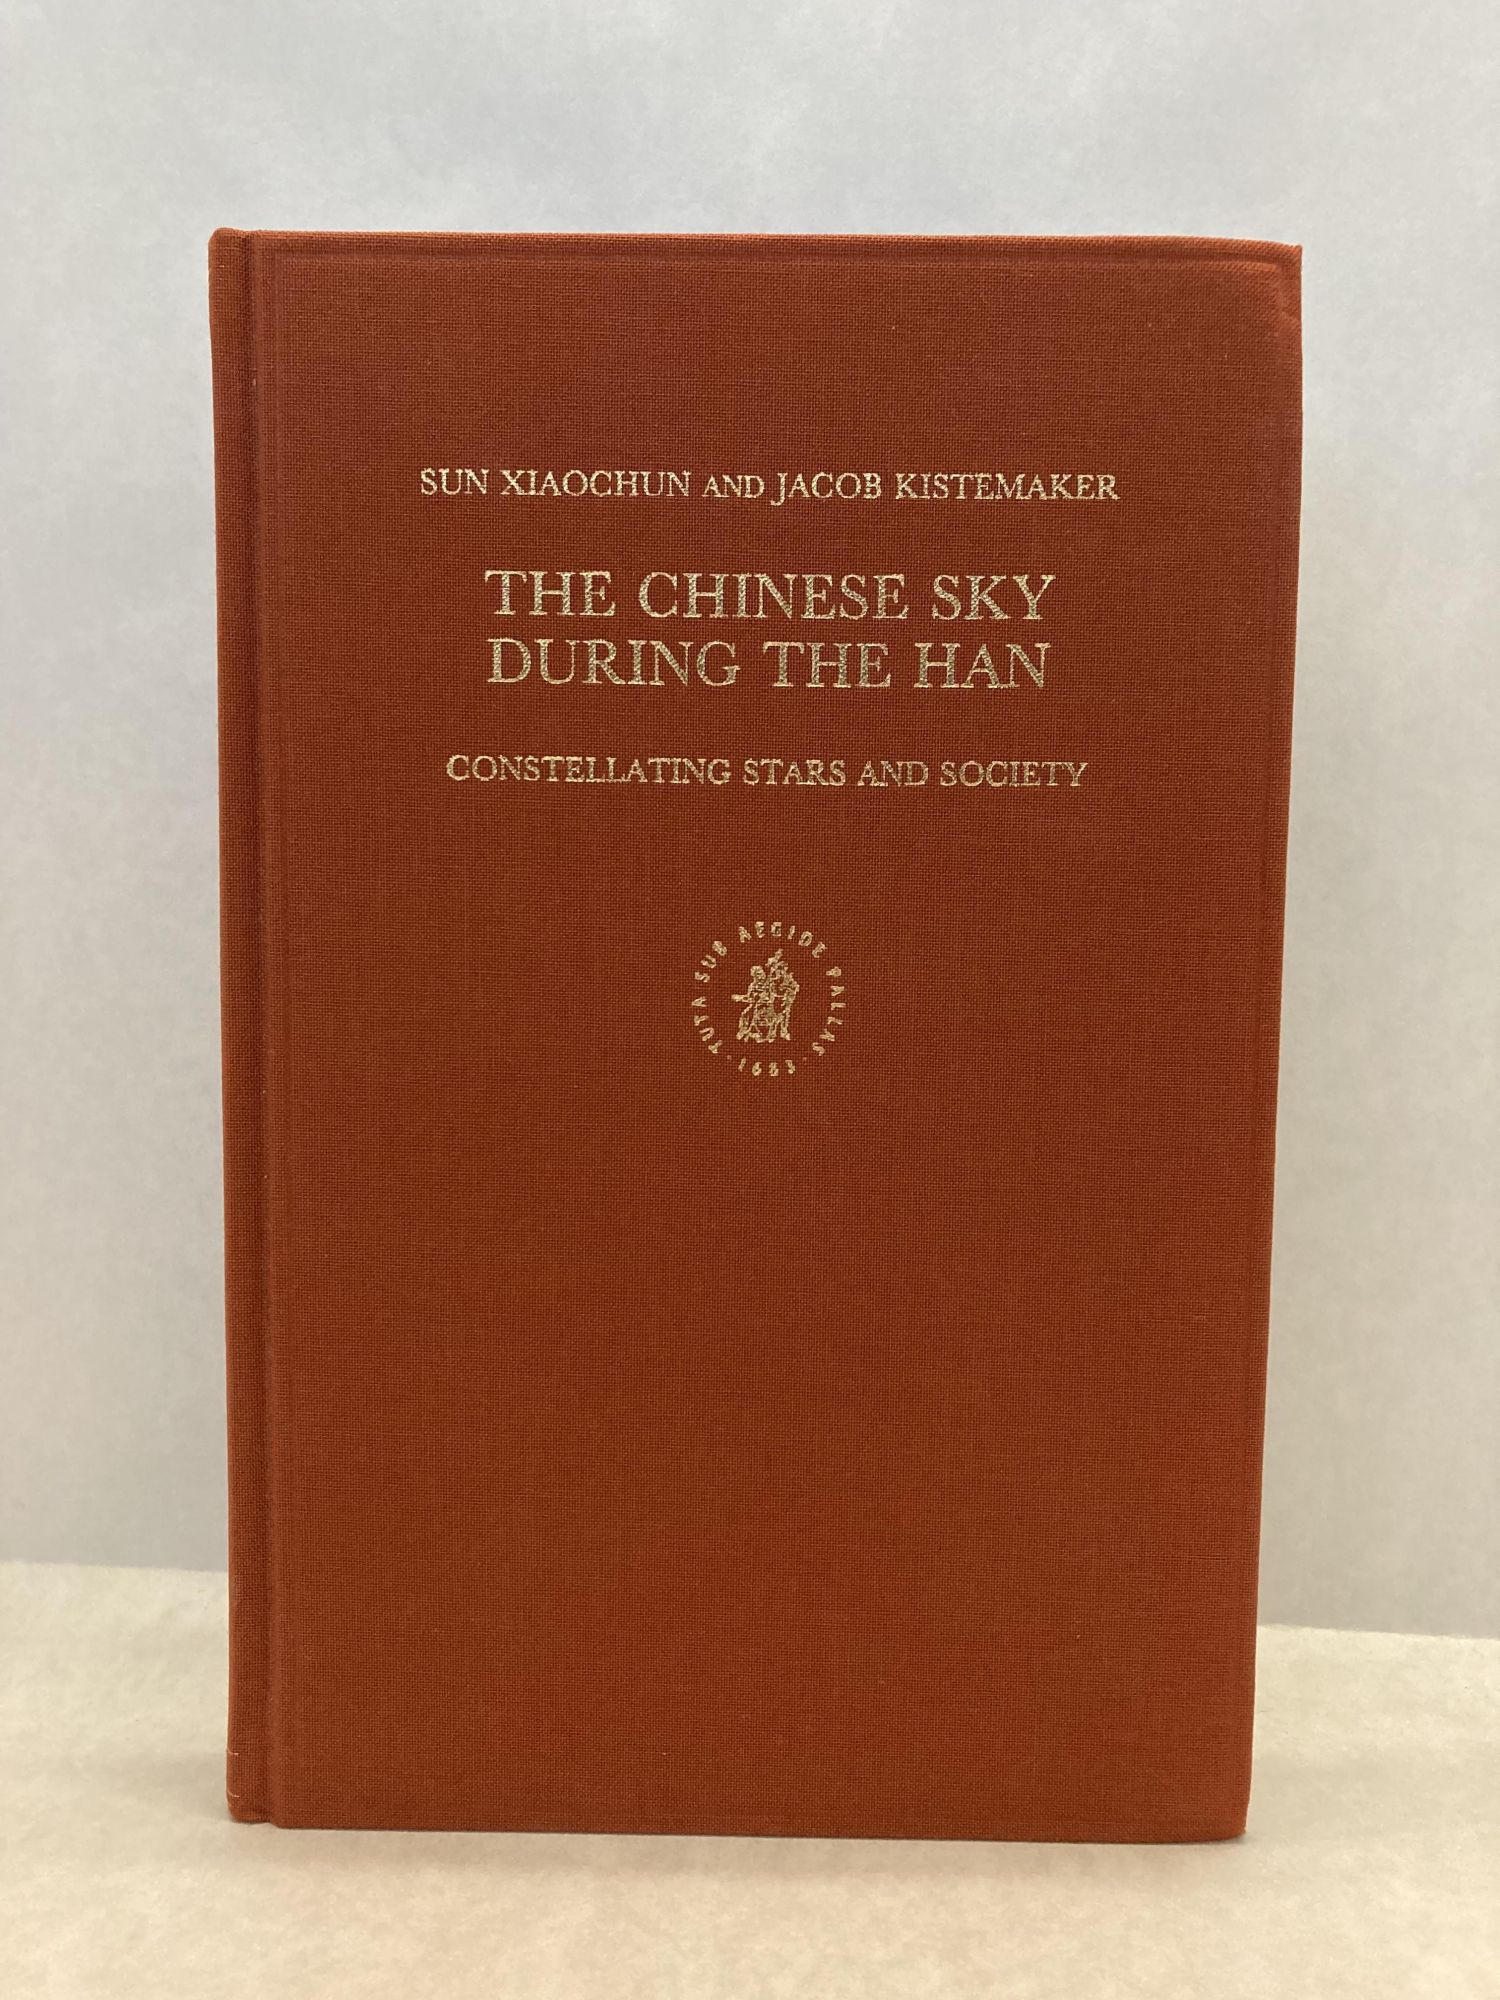 THE CHINESE SKY DURING THE HAN: CONSTELLATING STARS AND SOCIETY (SINICA LEIDENSIA, V. 38) - Sun Xiaochun & Jacob Kistemaker